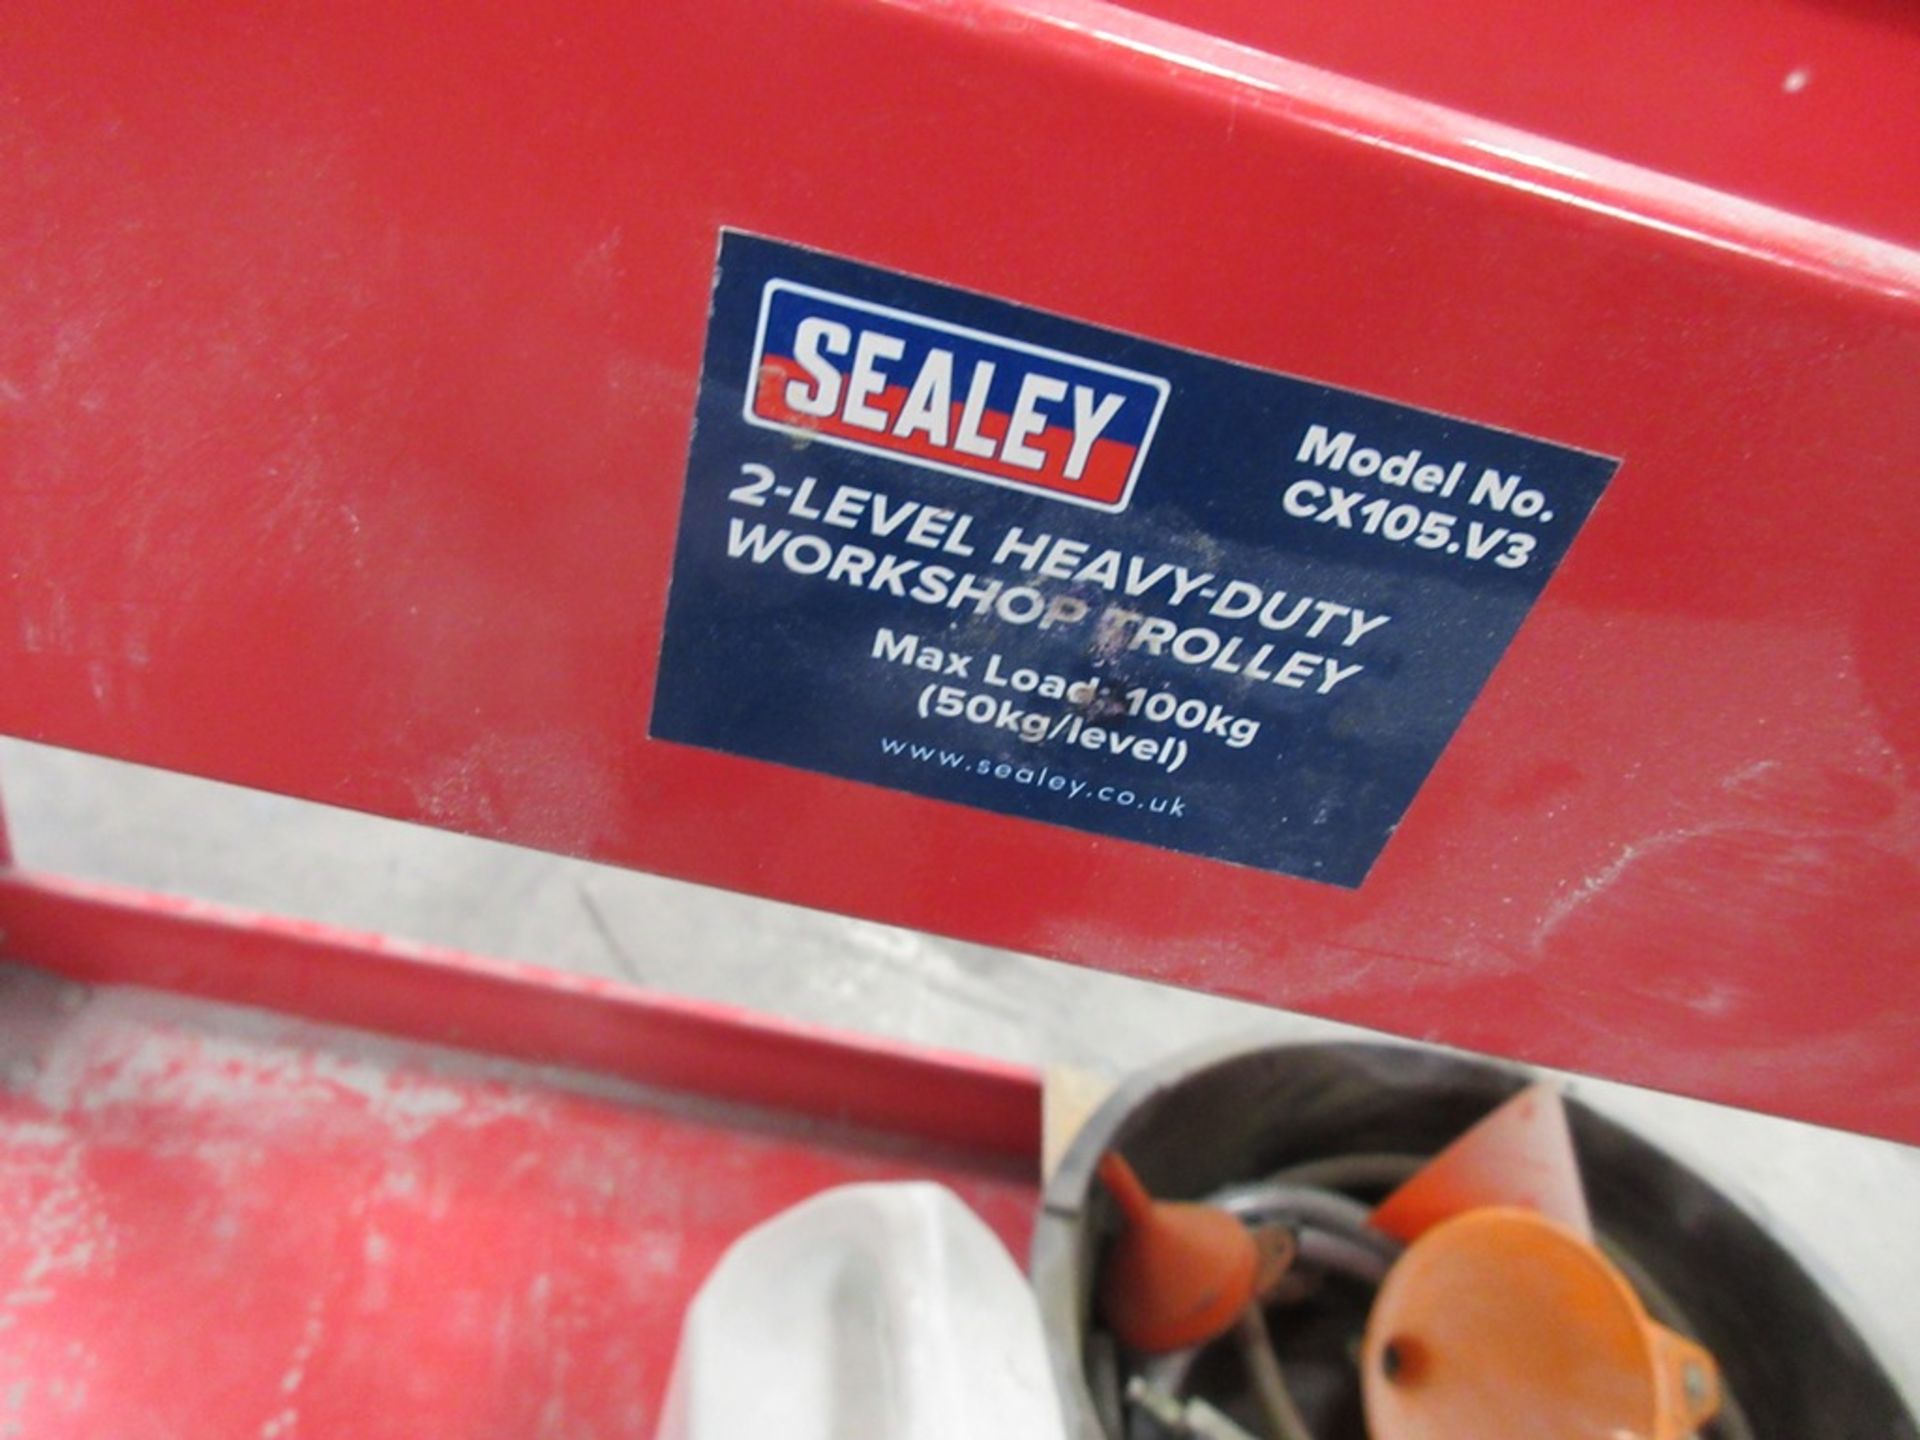 Sealey twin level mobile workshop trolley - Image 2 of 3